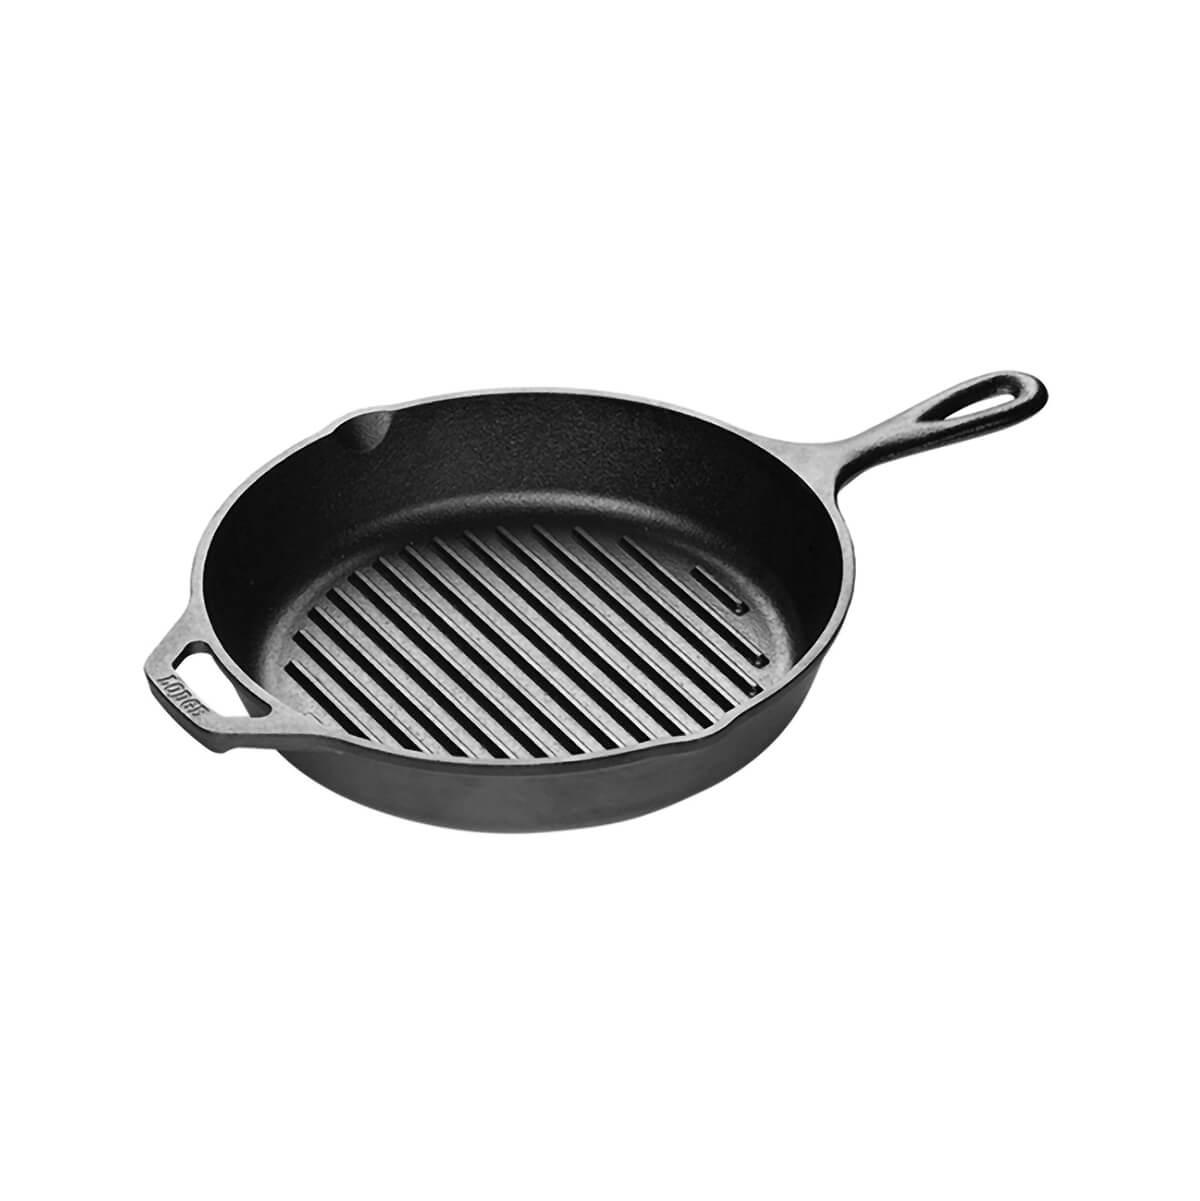  10.25 Inch Cast Iron Grill Pan